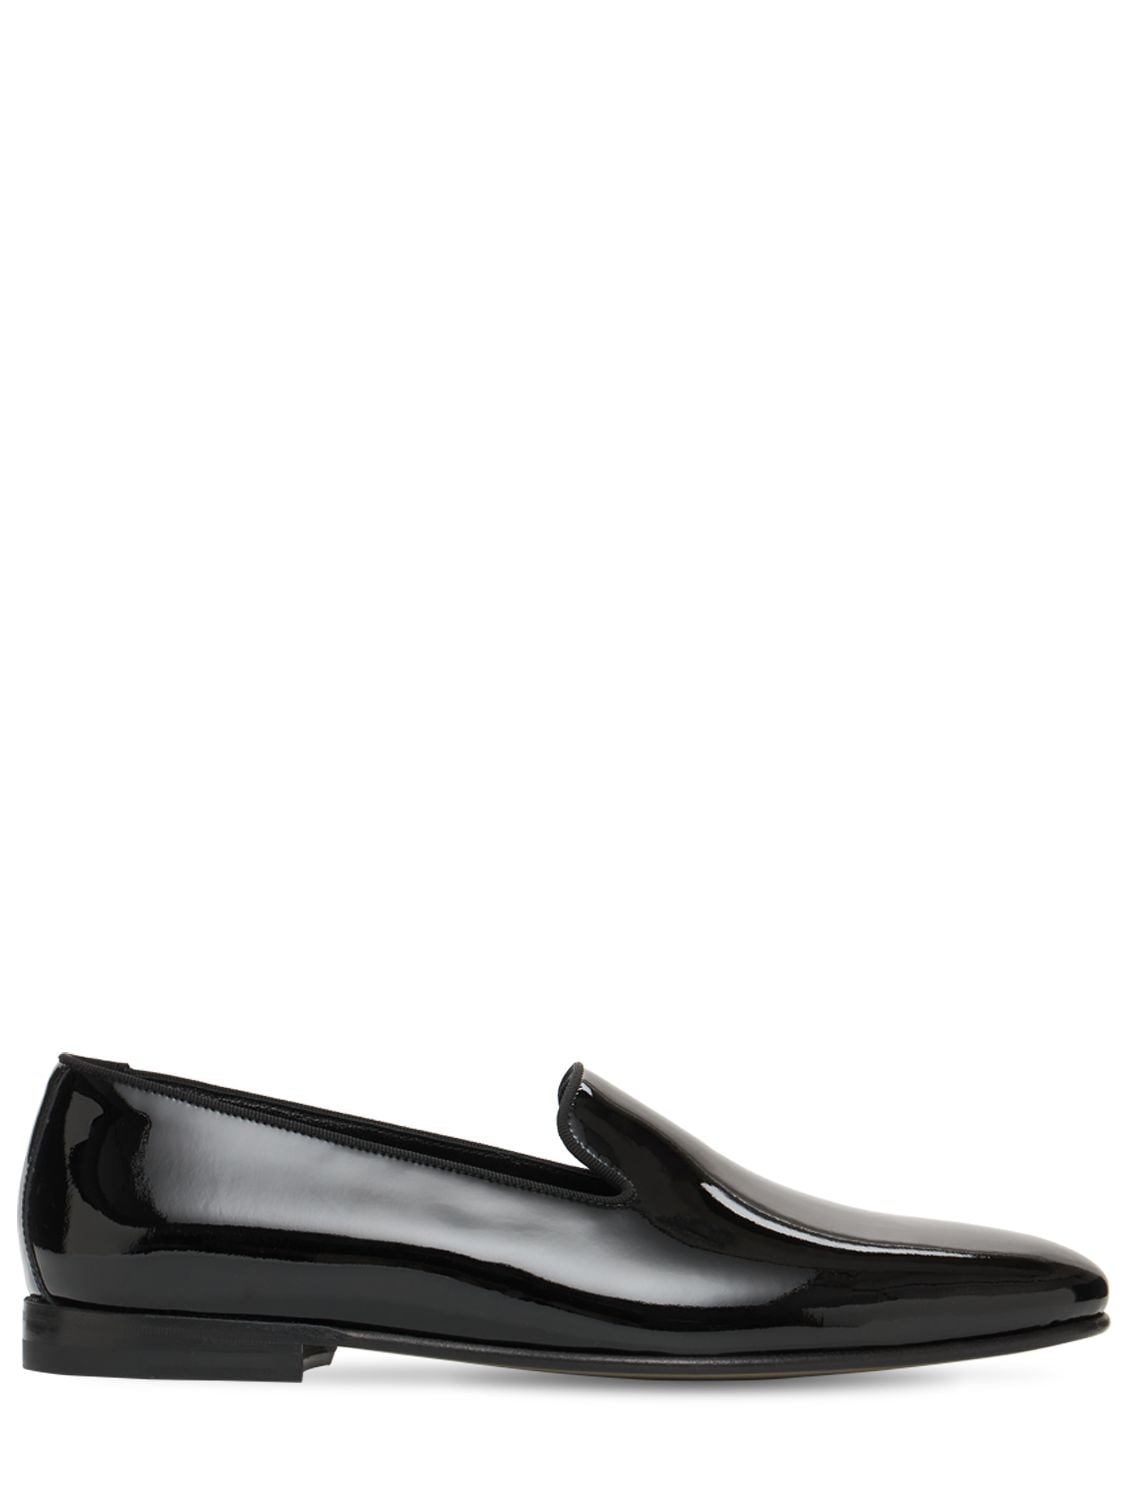 Mario Patent Leather Loafers